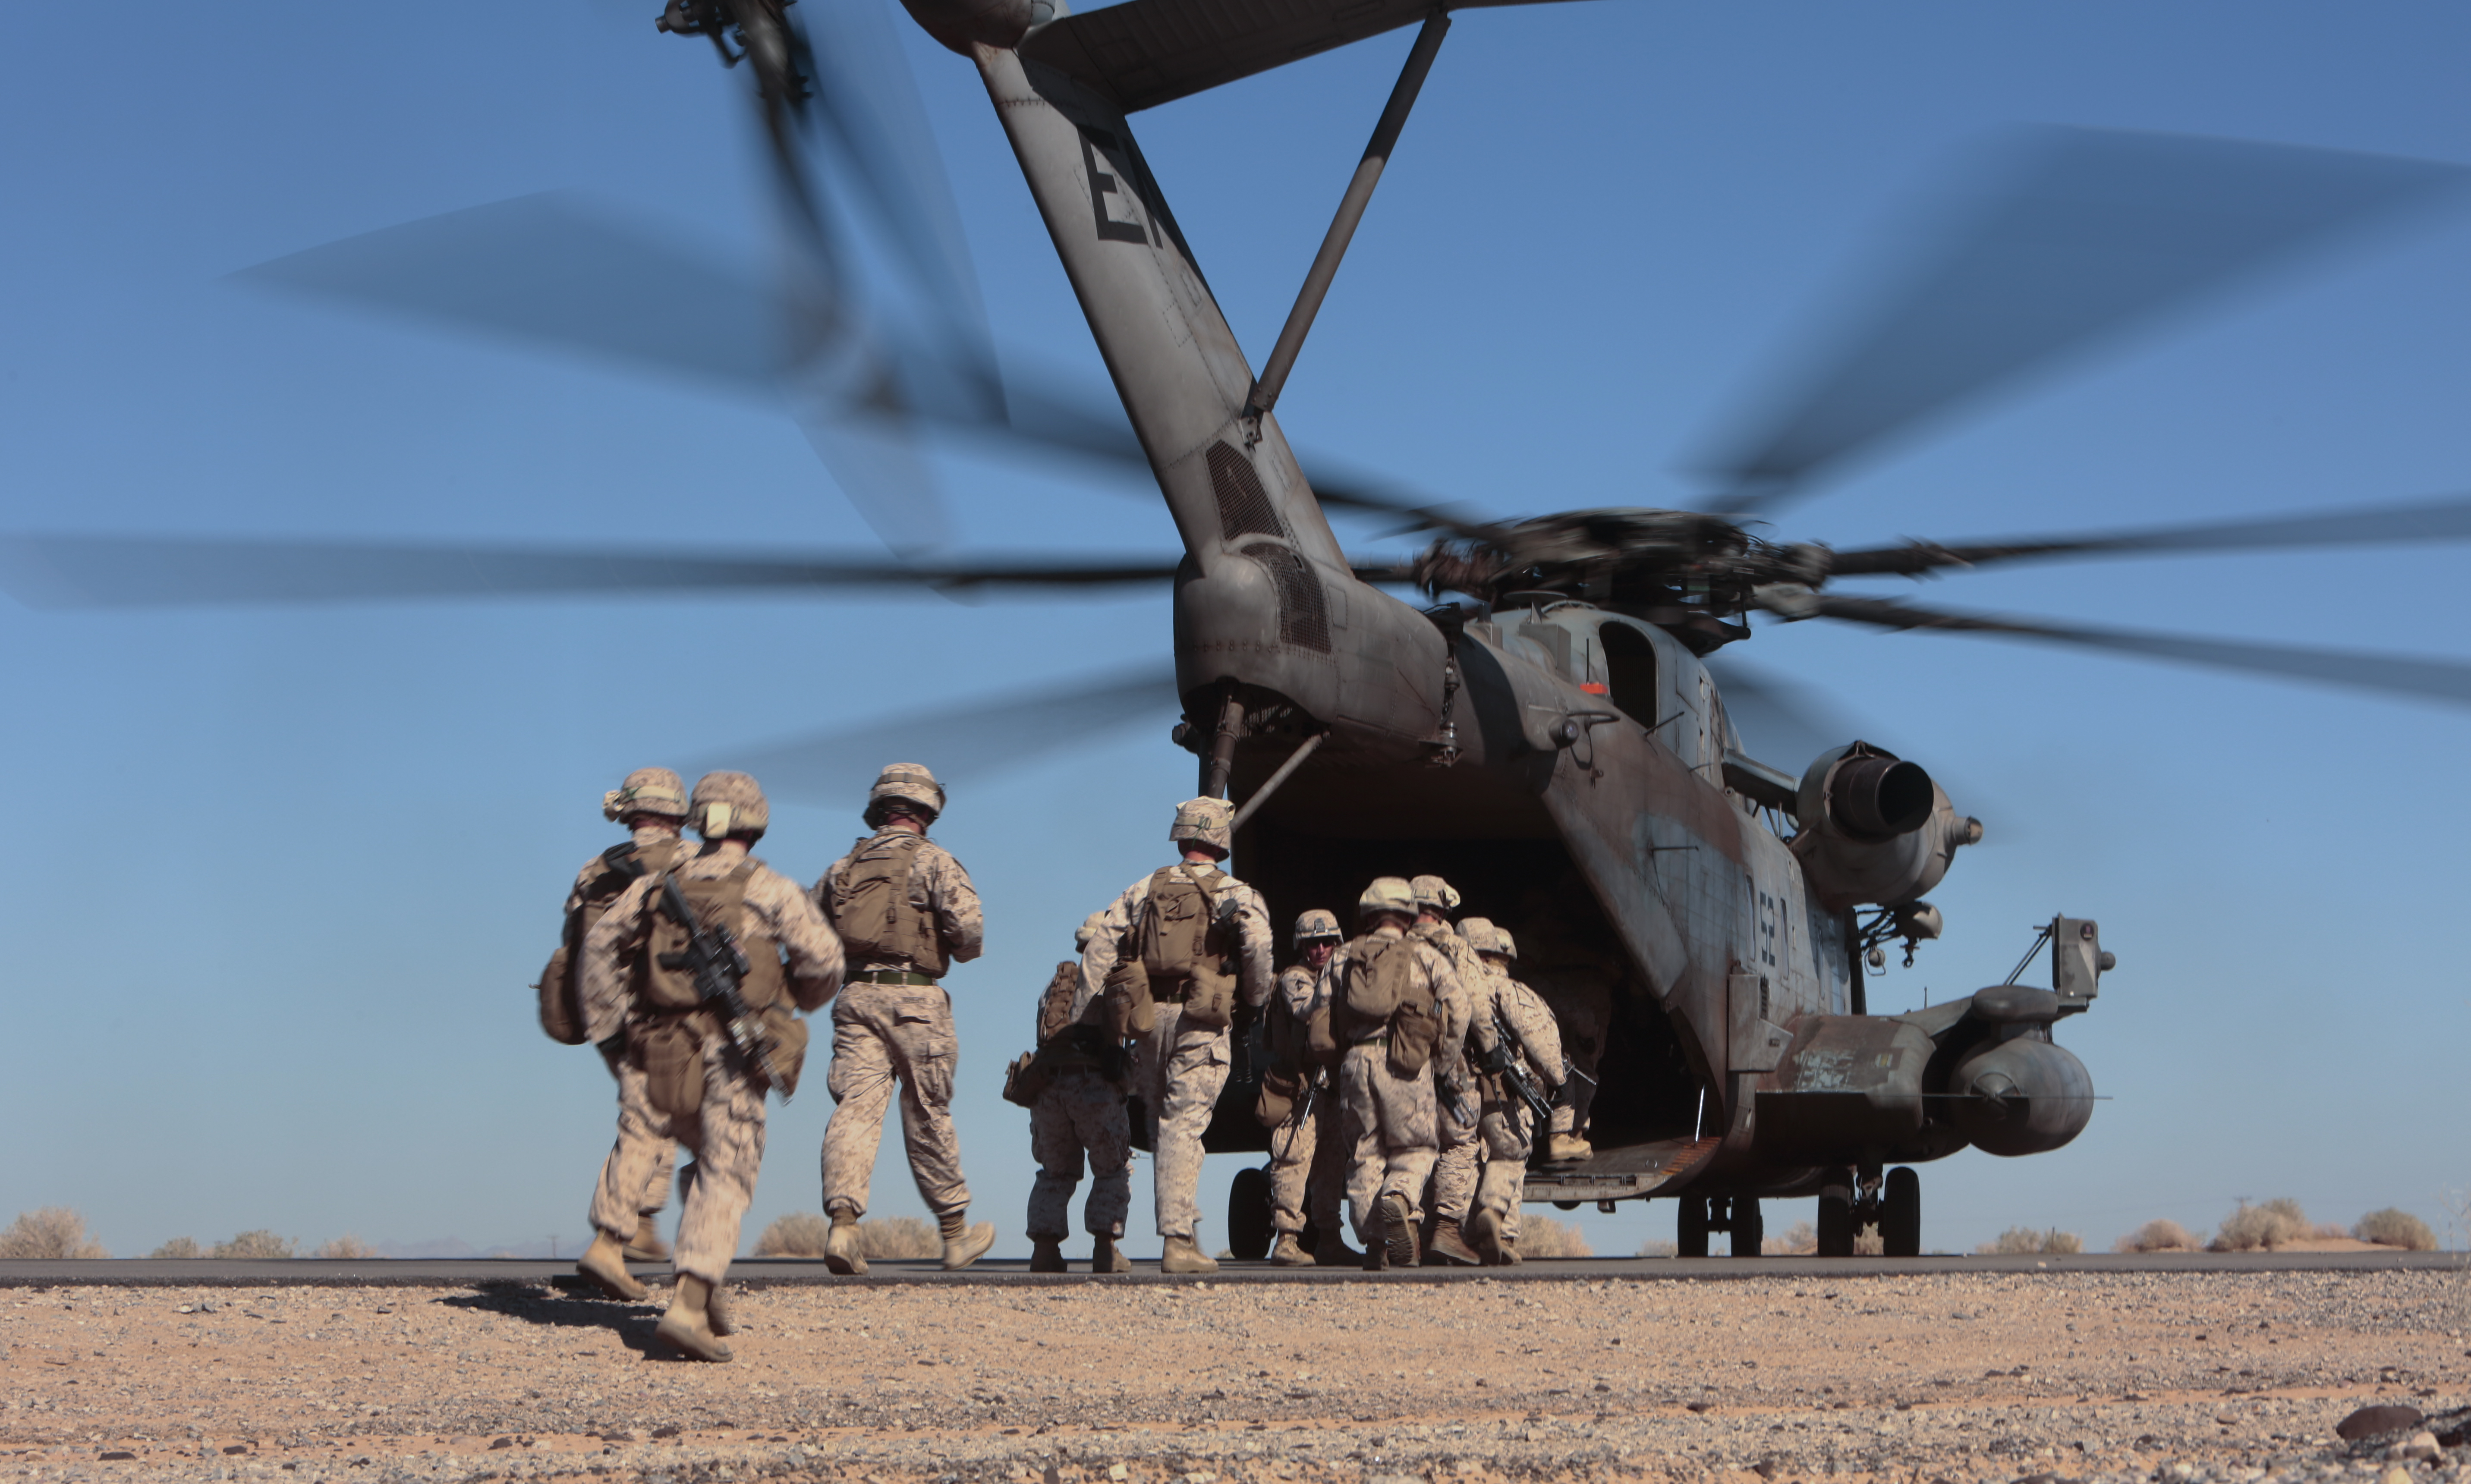 U.S. Marines with 2nd Battalion, 7th Marine Regiment, 1st Marine Division, 1st Marine Expeditionary Force board a CH-53E Super Stallion during a fast rope exercise at Auxiliary Airfield 2, Yuma, Ariz., Oct. 2, 2015. US Marine Corps photo.